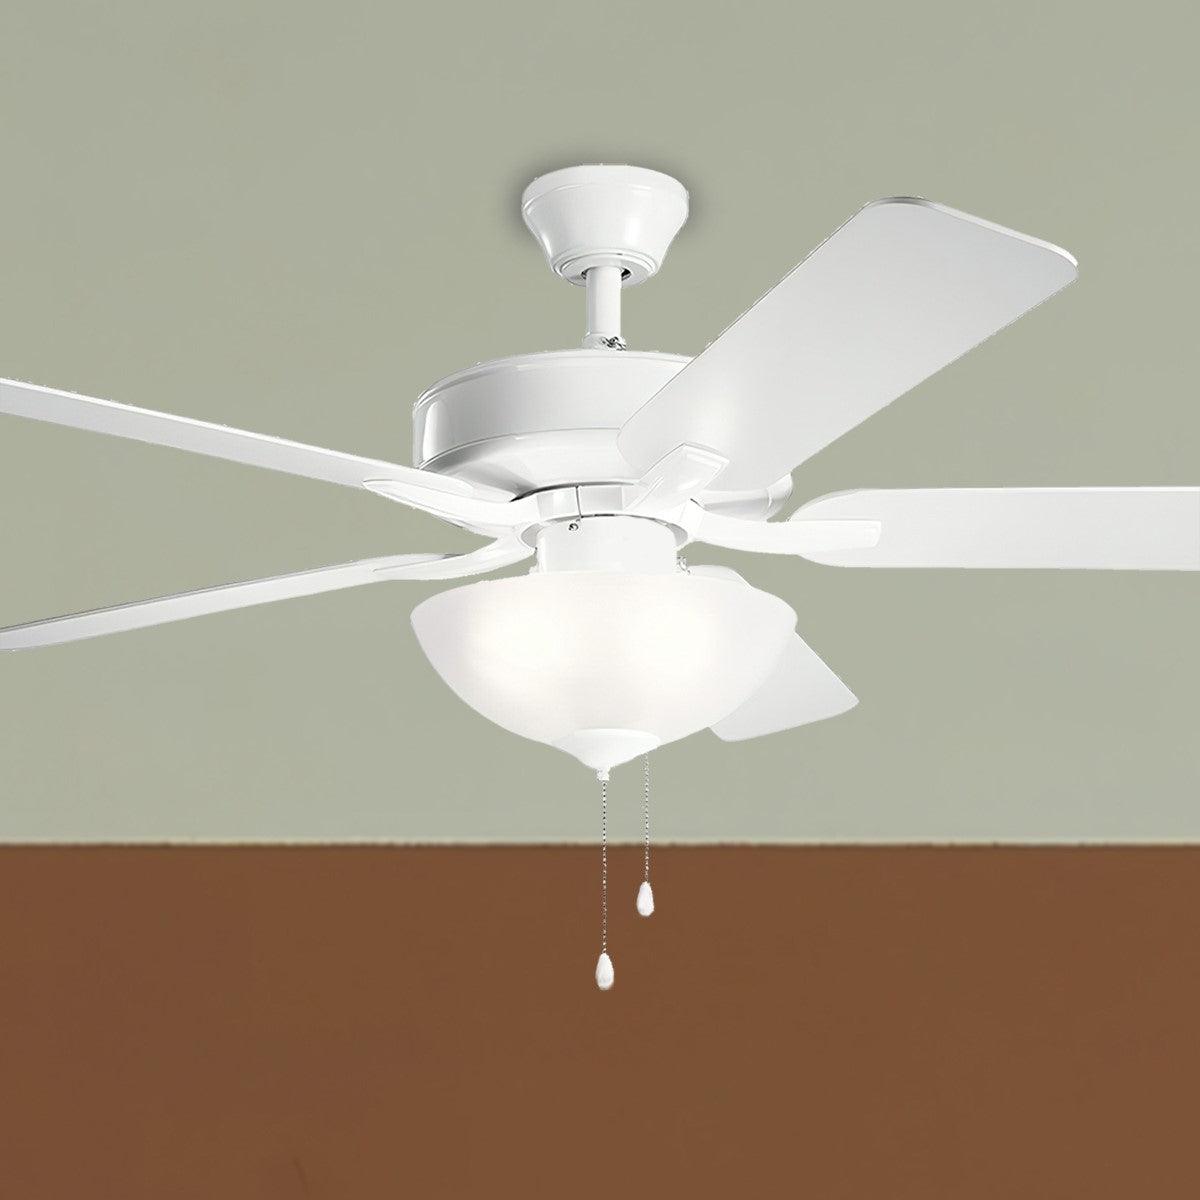 Basics Pro 52 Inch Ceiling Fan With 2 Light And Pull Chain, Etched Glass